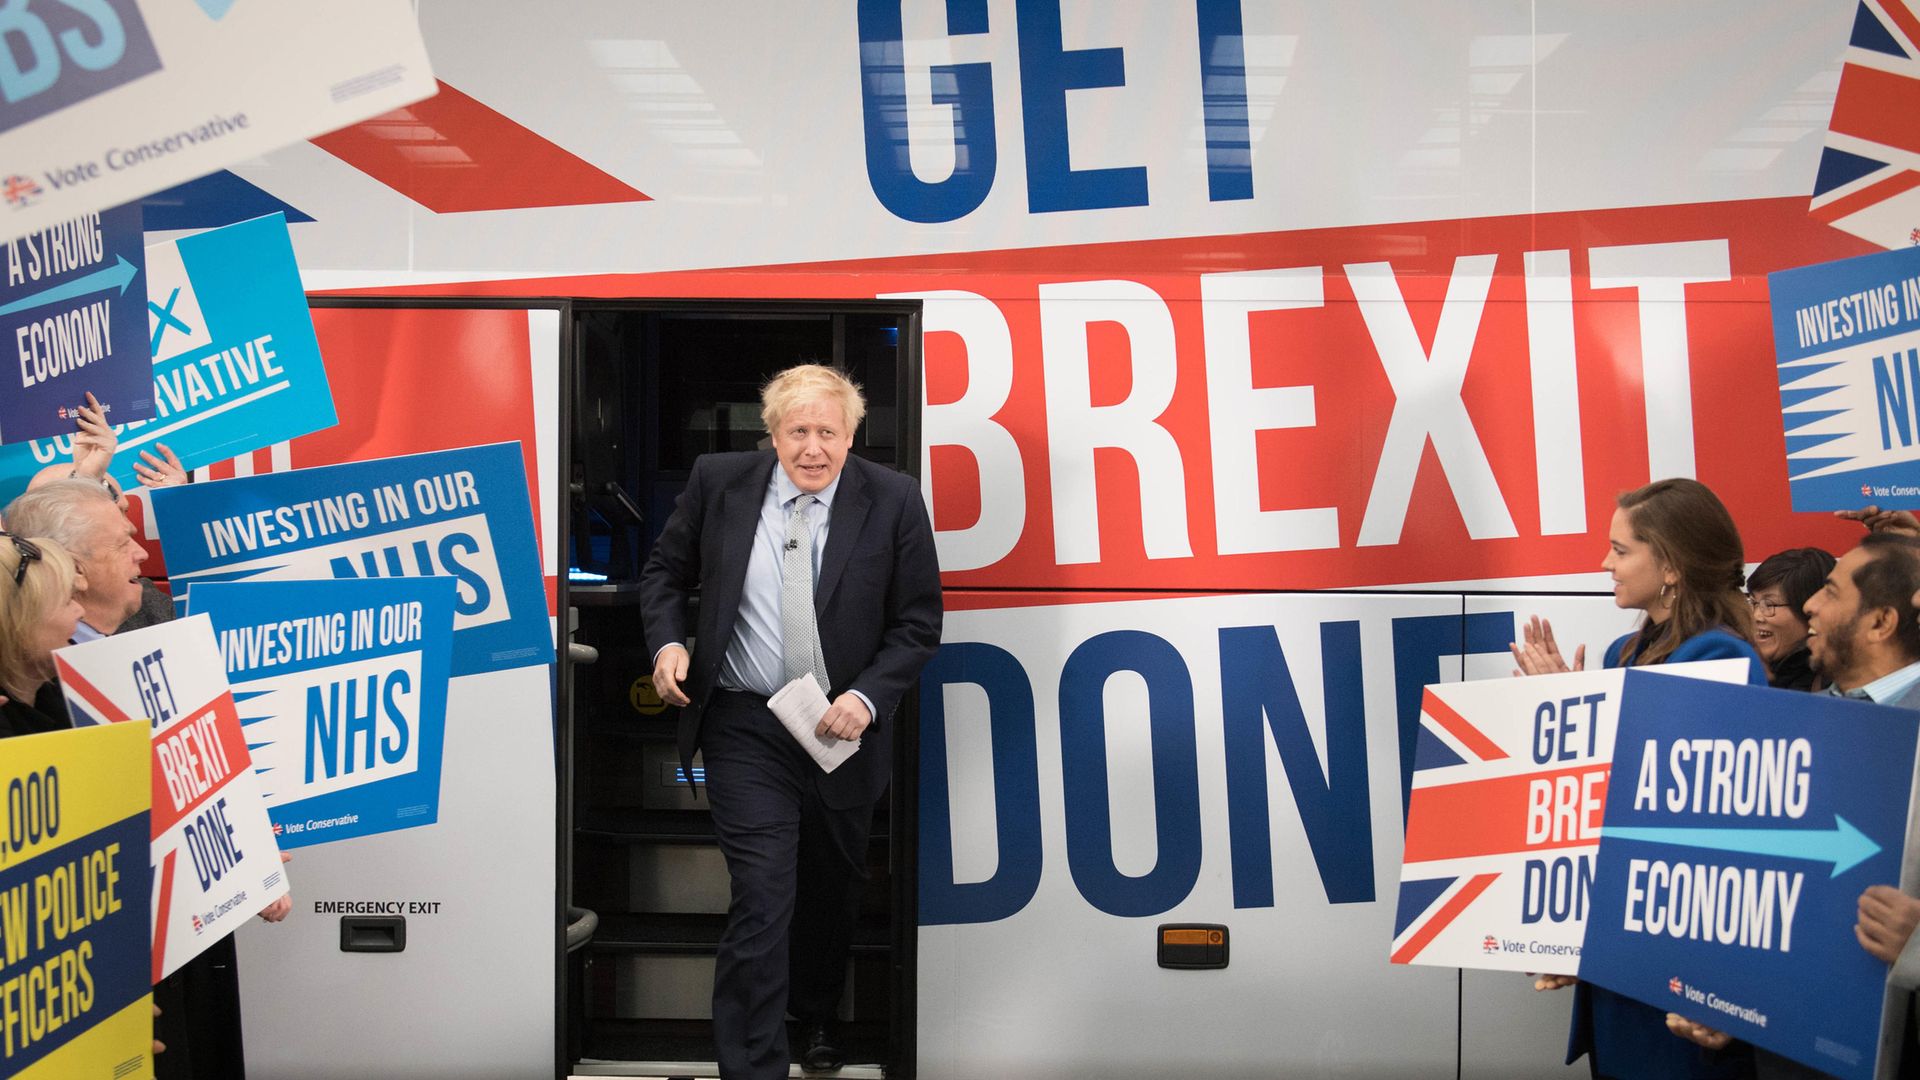 Prime minister Boris Johnson at the unveiling of the Conservative Party battlebus in Middleton, Greater Manchester. - Credit: PA